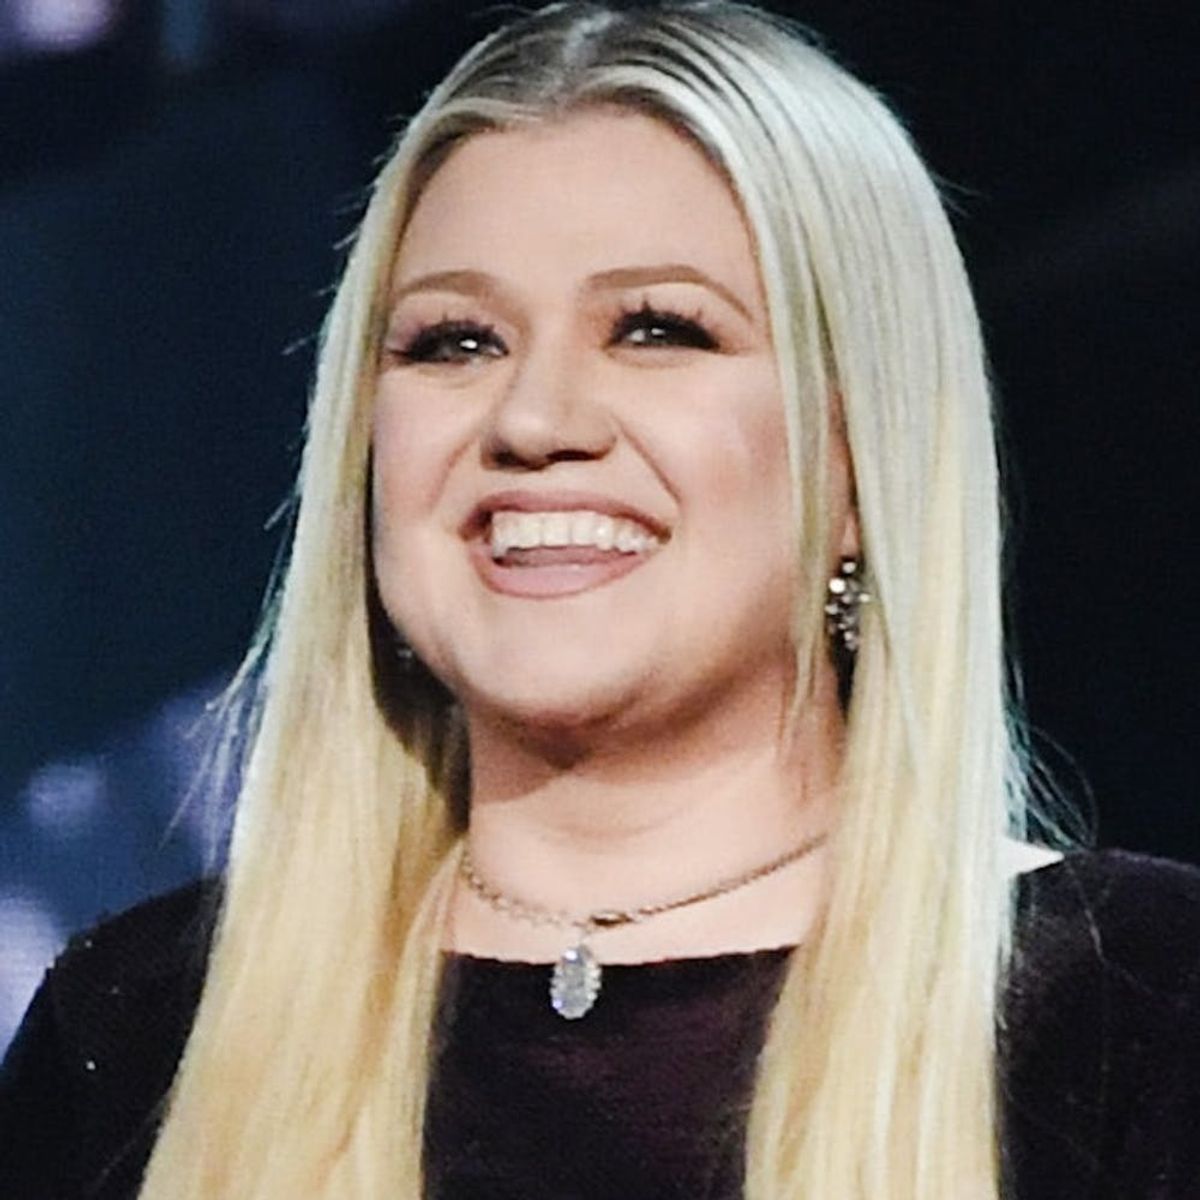 Kelly Clarkson Looks Like a Whole New Woman With Blonde Bangs